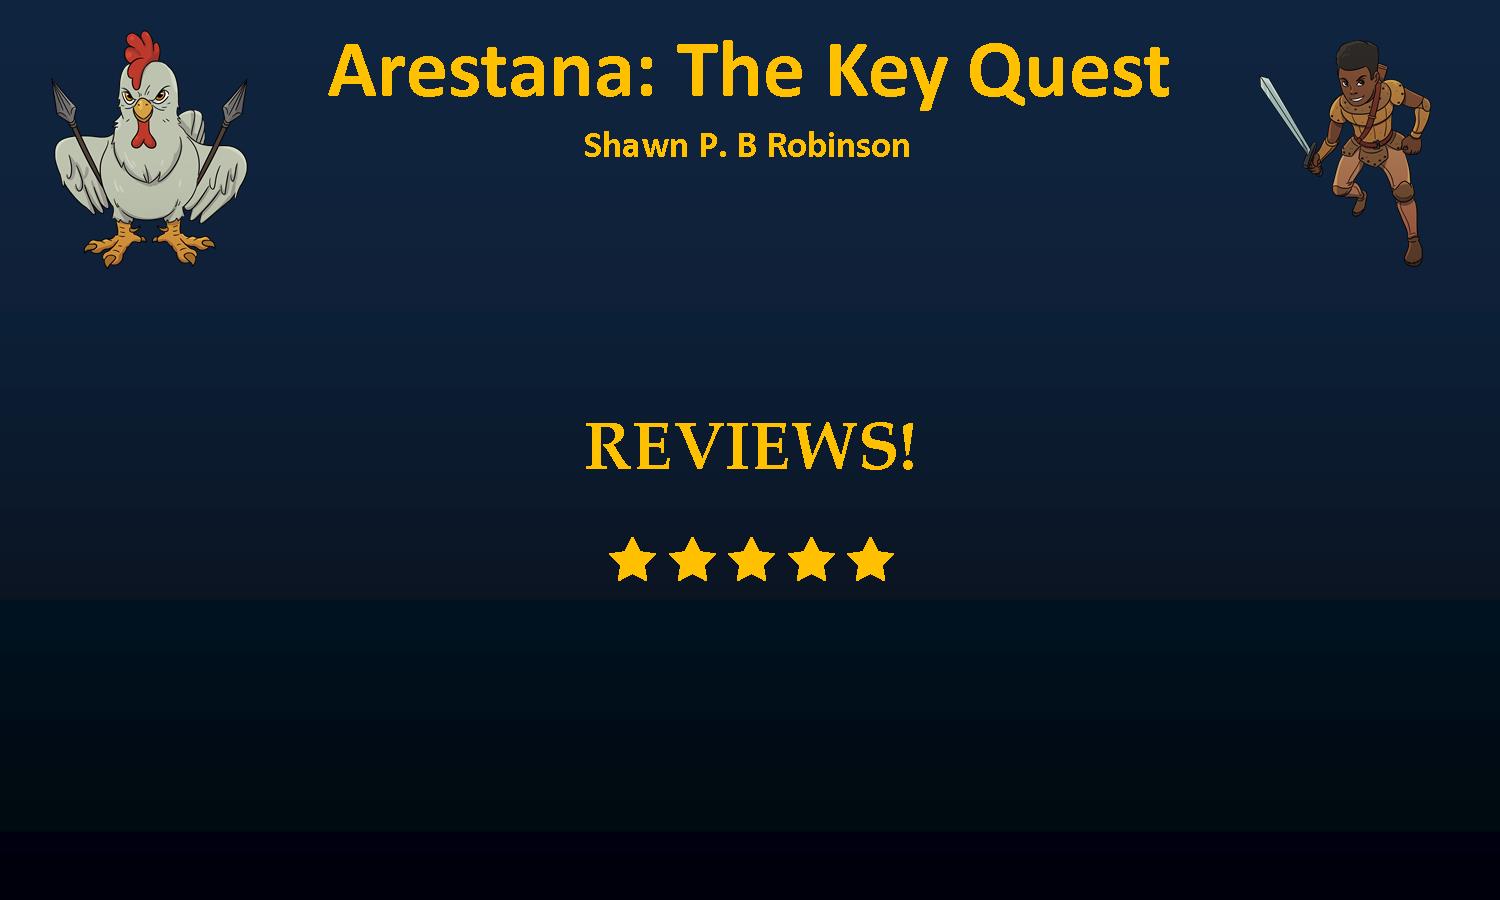 Reviews for Arestana: The Key Quest